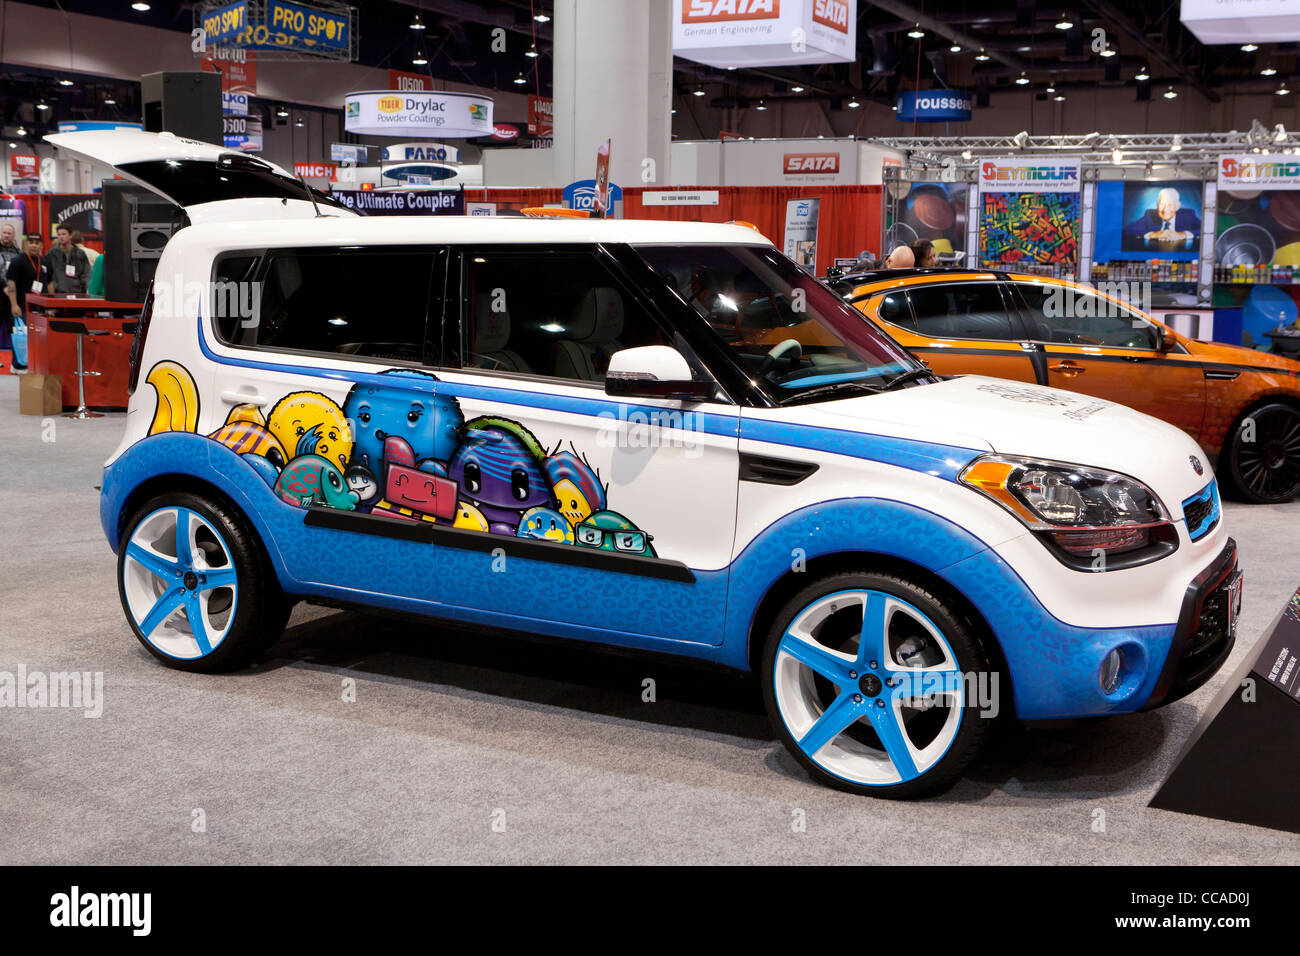 “Hole in One” Kia Soul - Kia Concept car inspired by Michelle Wie Stock Photo